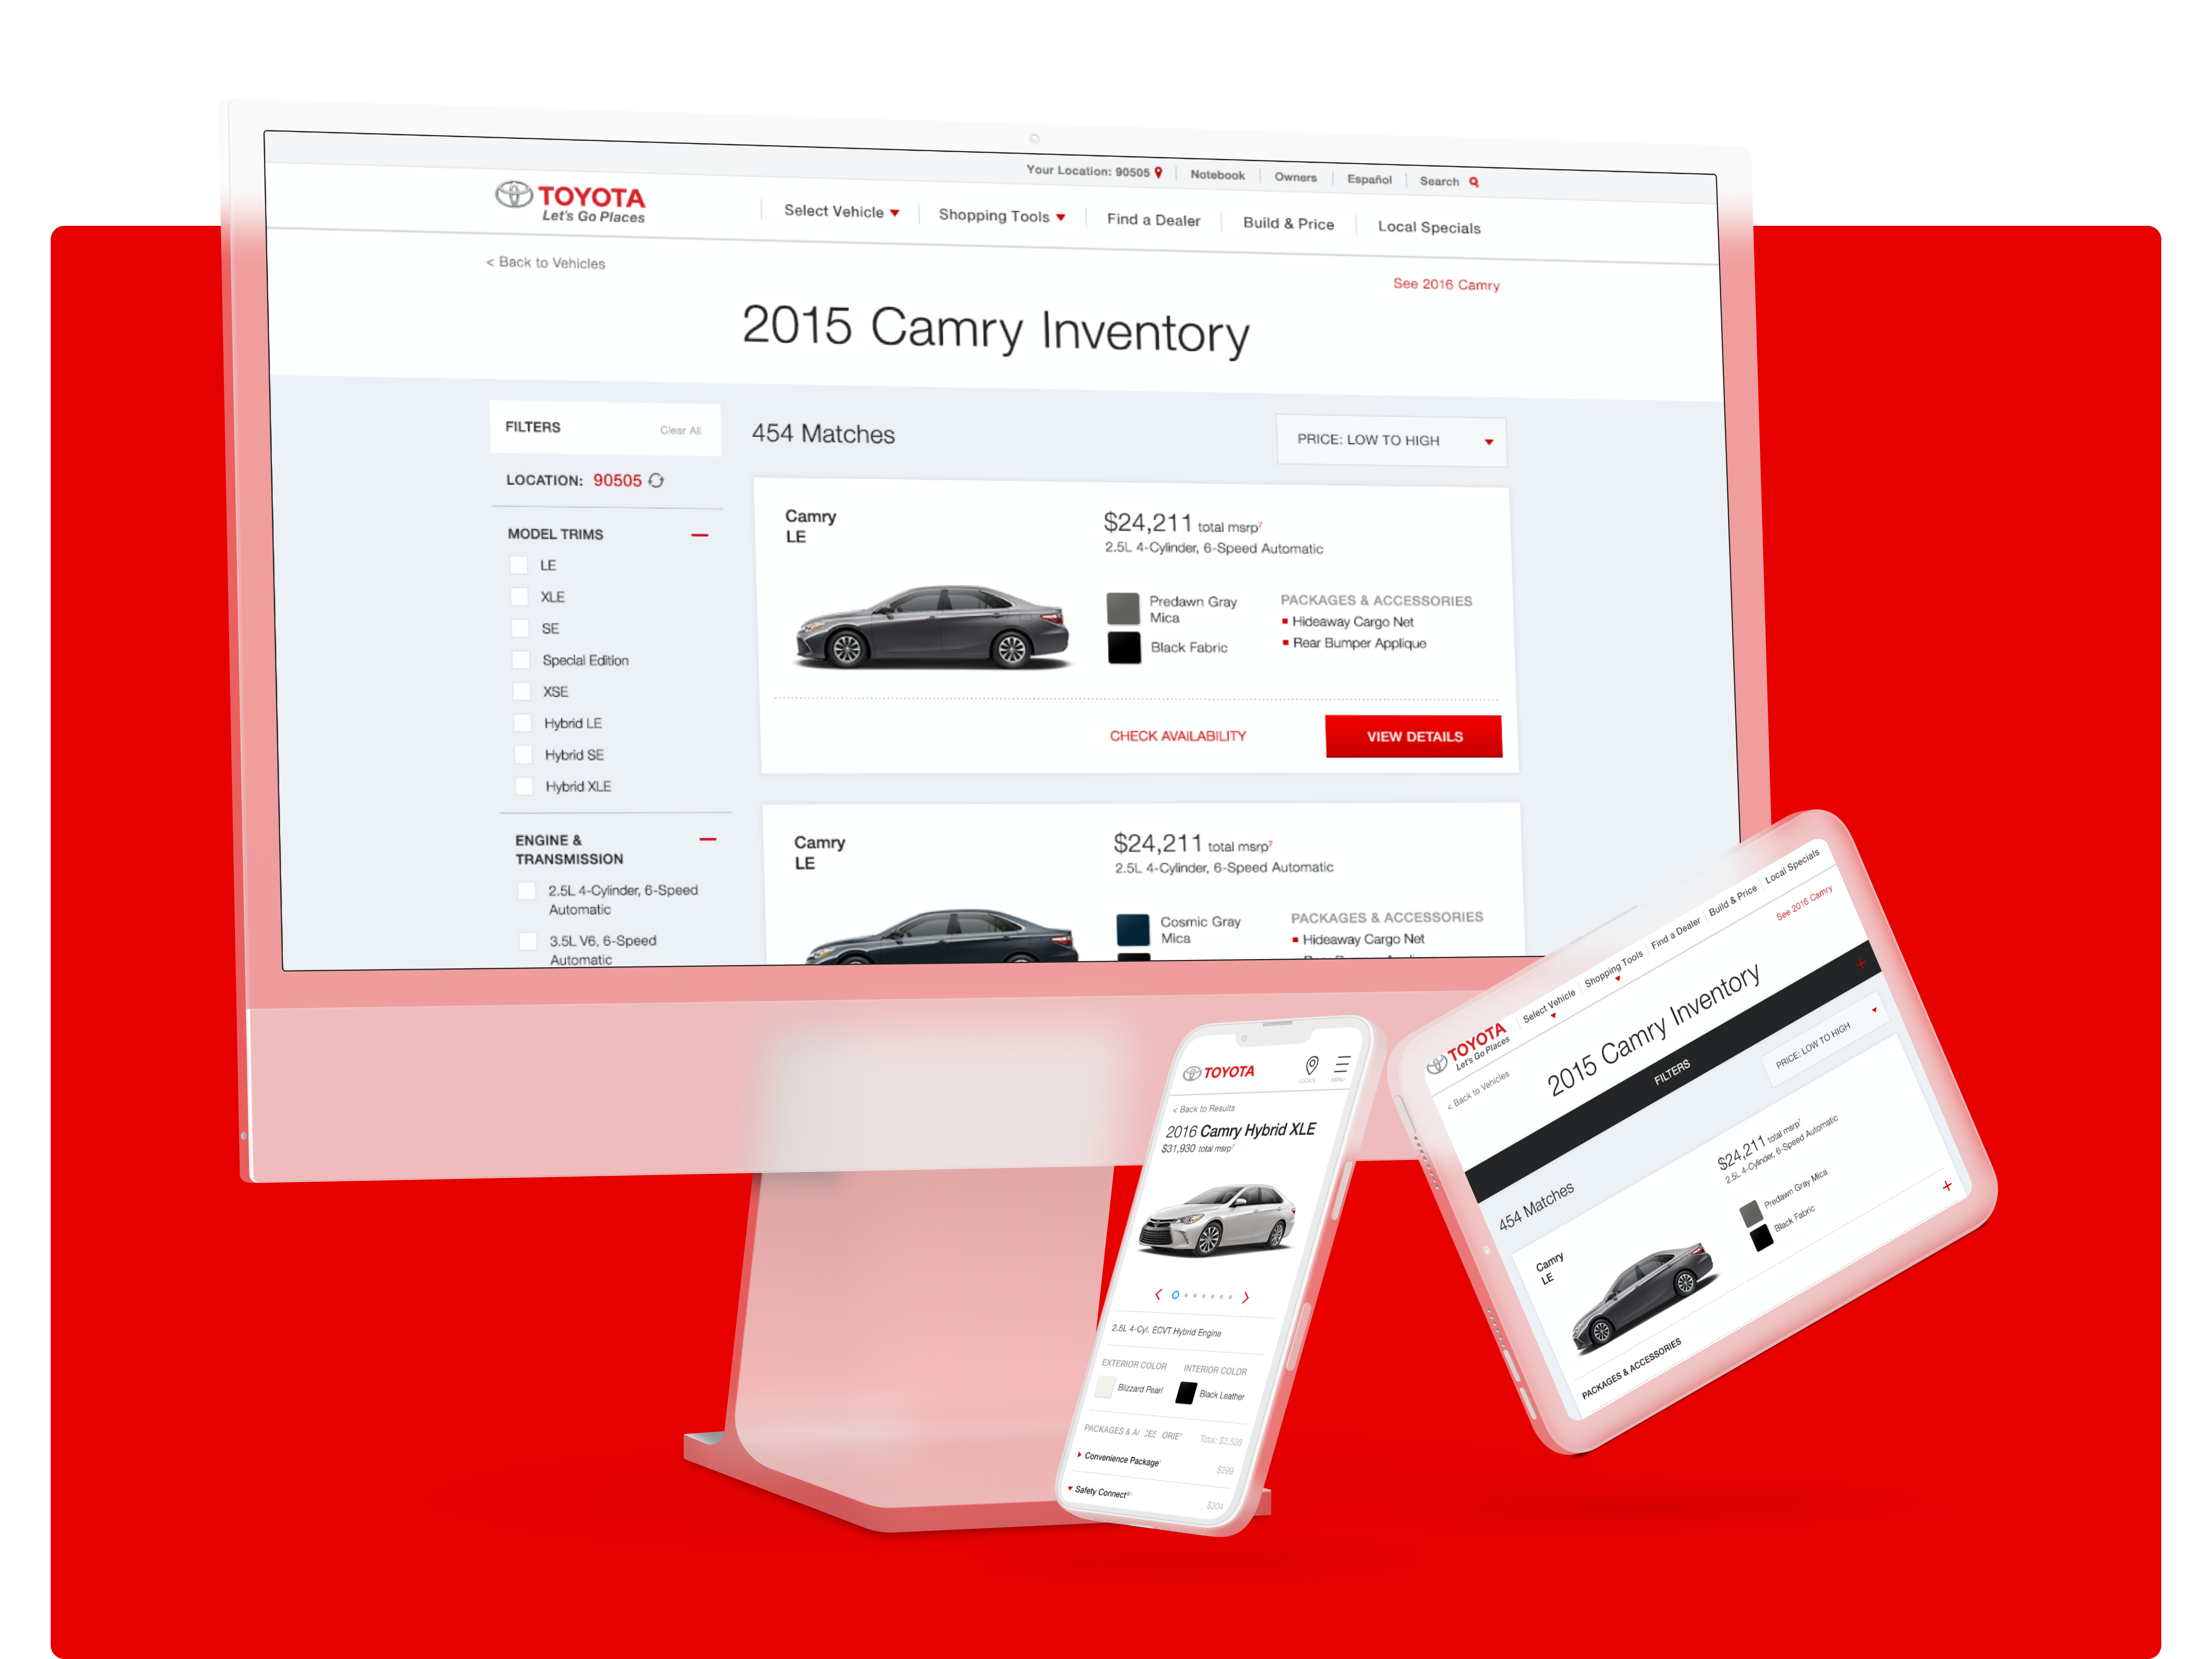 Finding your next car in the Toyota Inventory